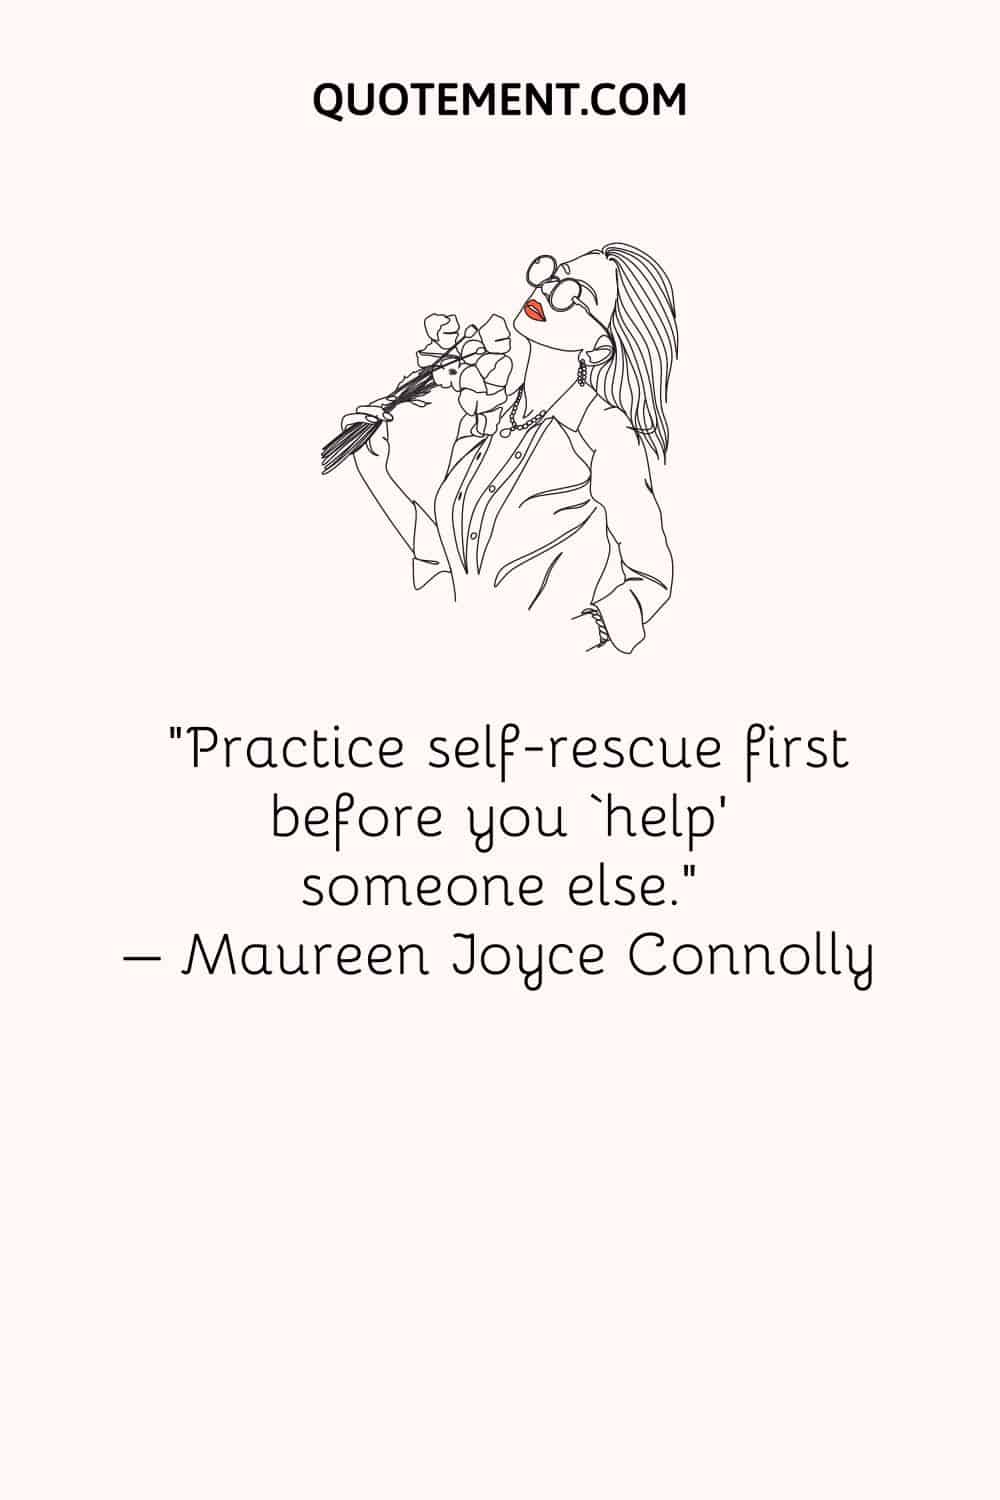 Practice self-rescue first before you ‘help’ someone else